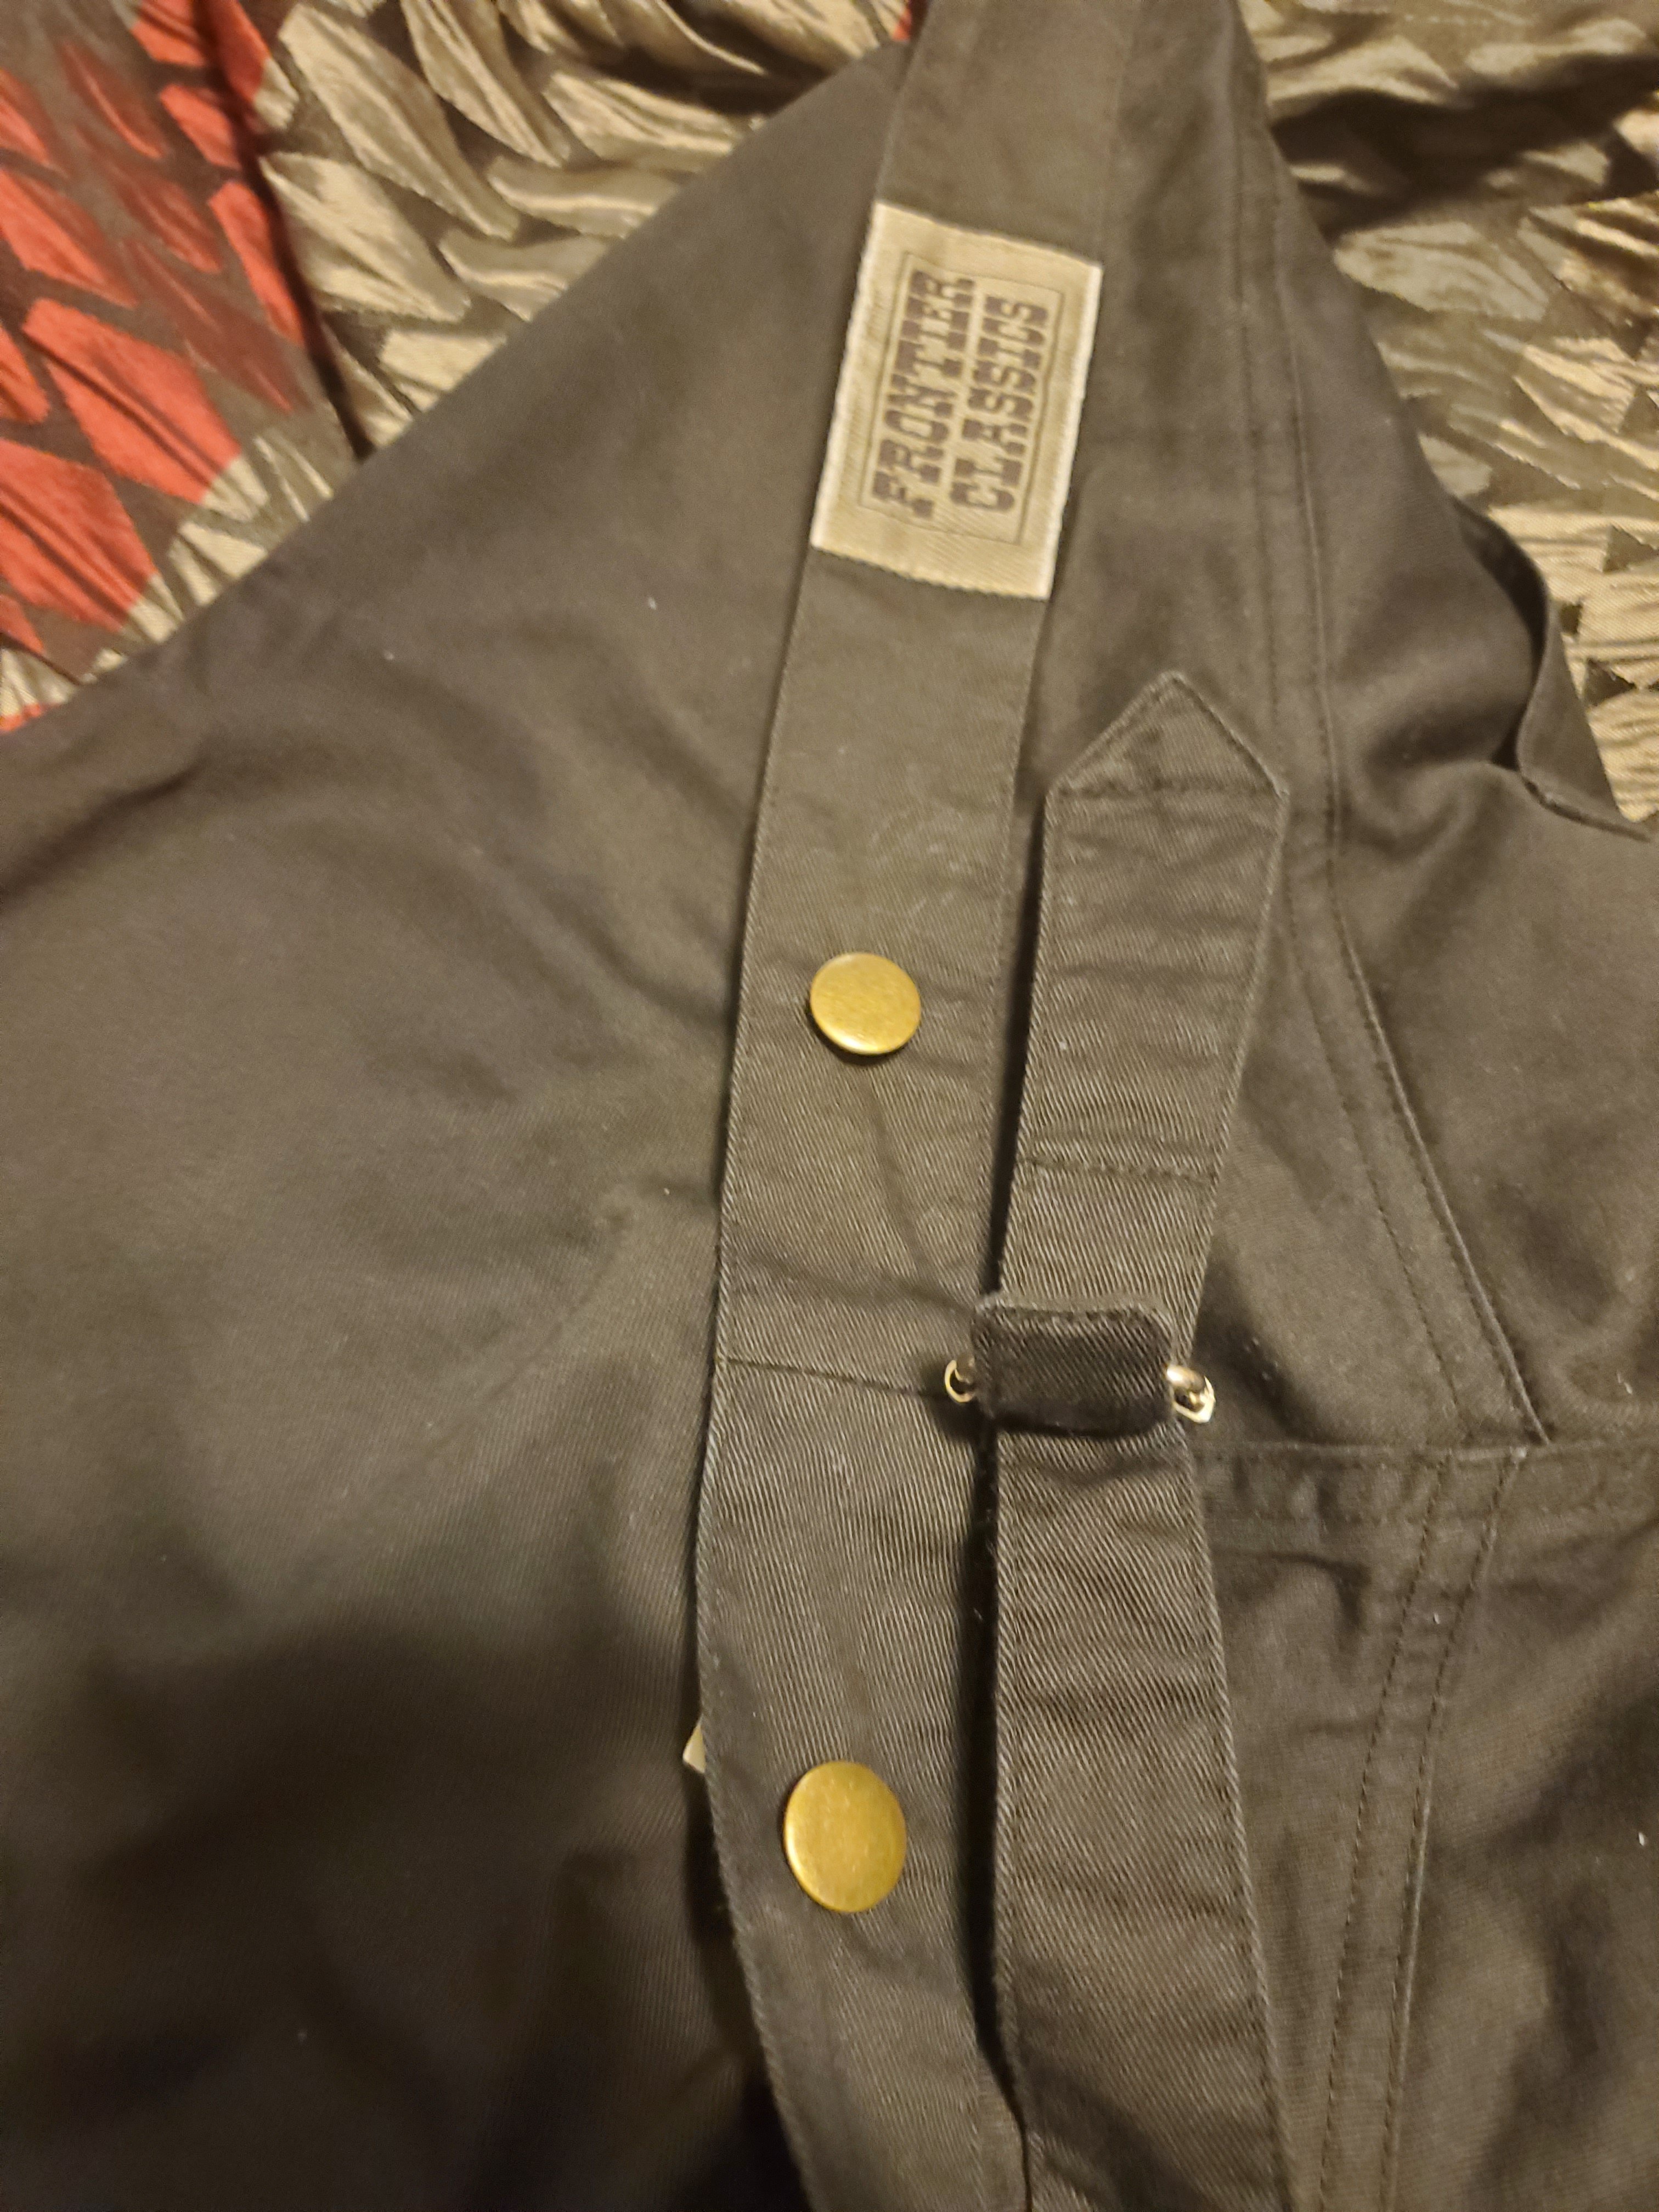 Cowboy pants for sale! - SASS Wire Classifieds - SASS Wire Forum